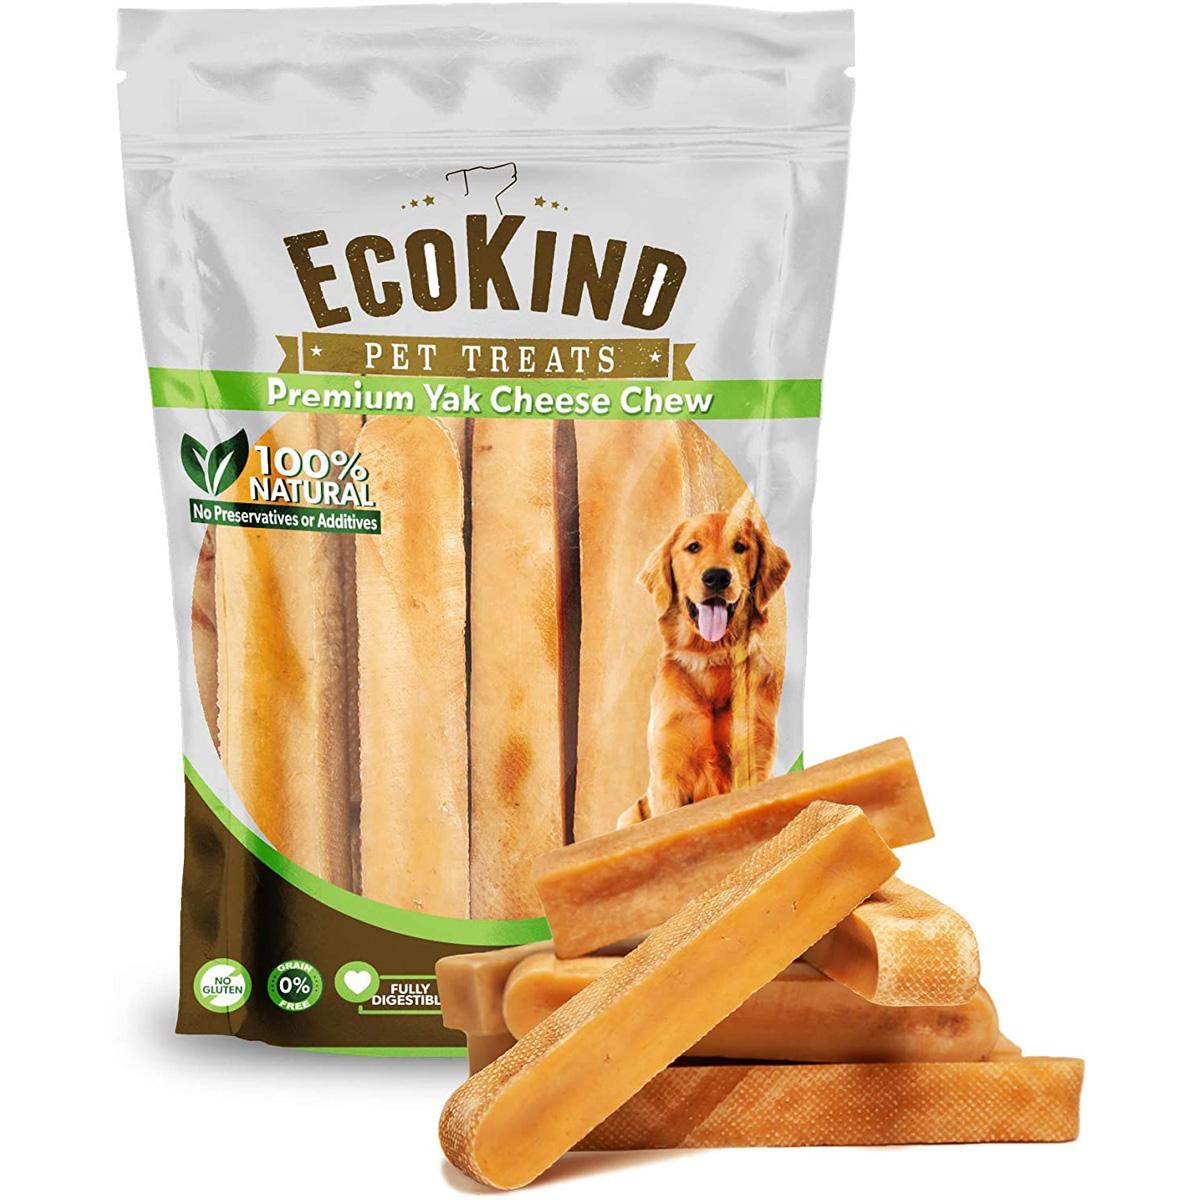 EcoKind Yak Cheese Dog Chews for $18.95